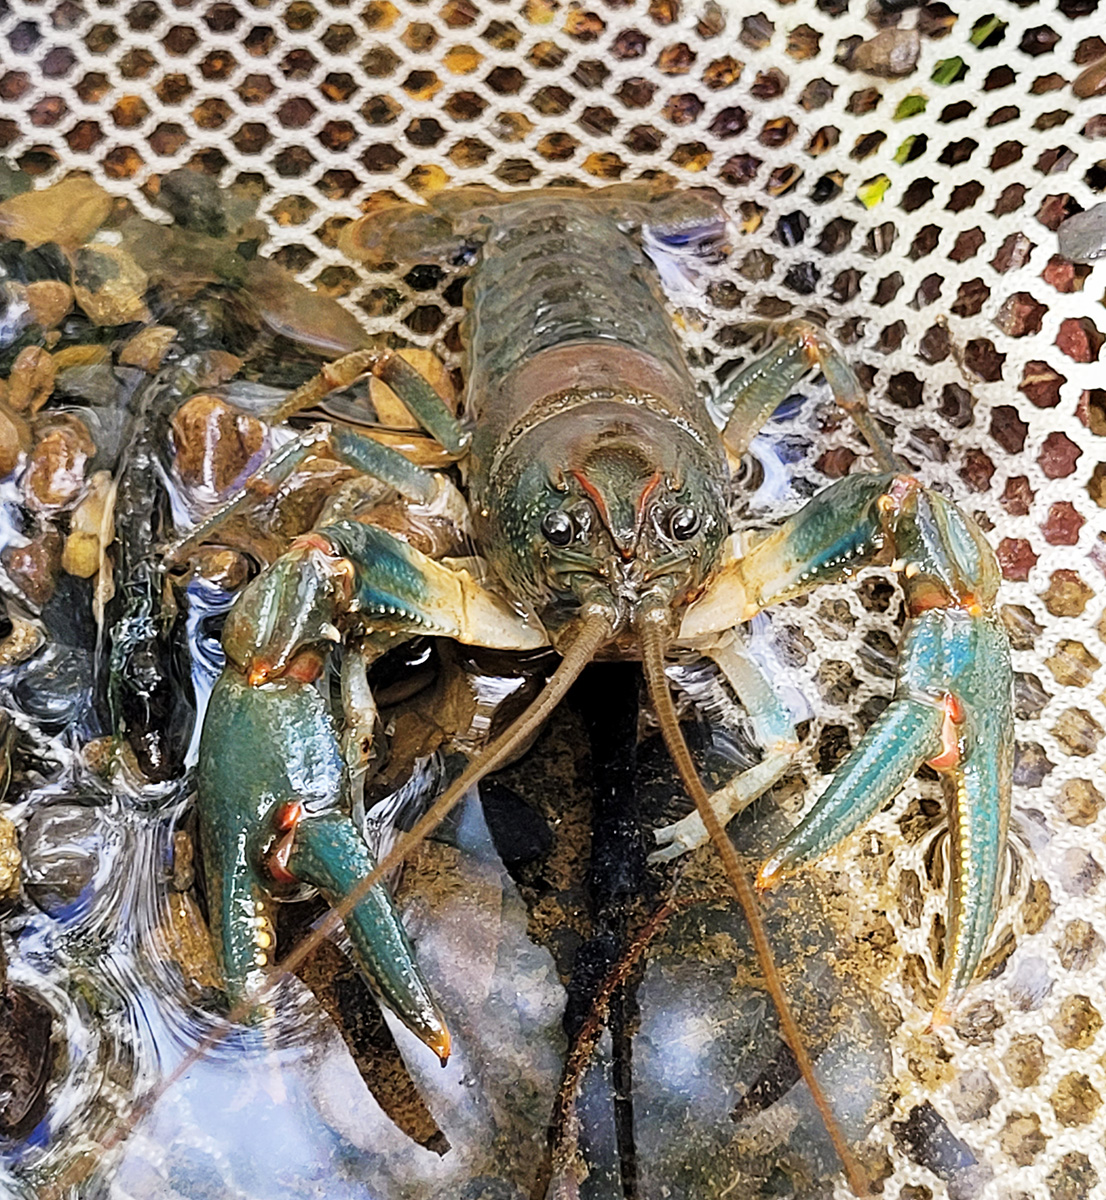 An image of a Big Sandy Crayfish removed from the water and in a net; these crayfish play a vital role in their ecosystem.